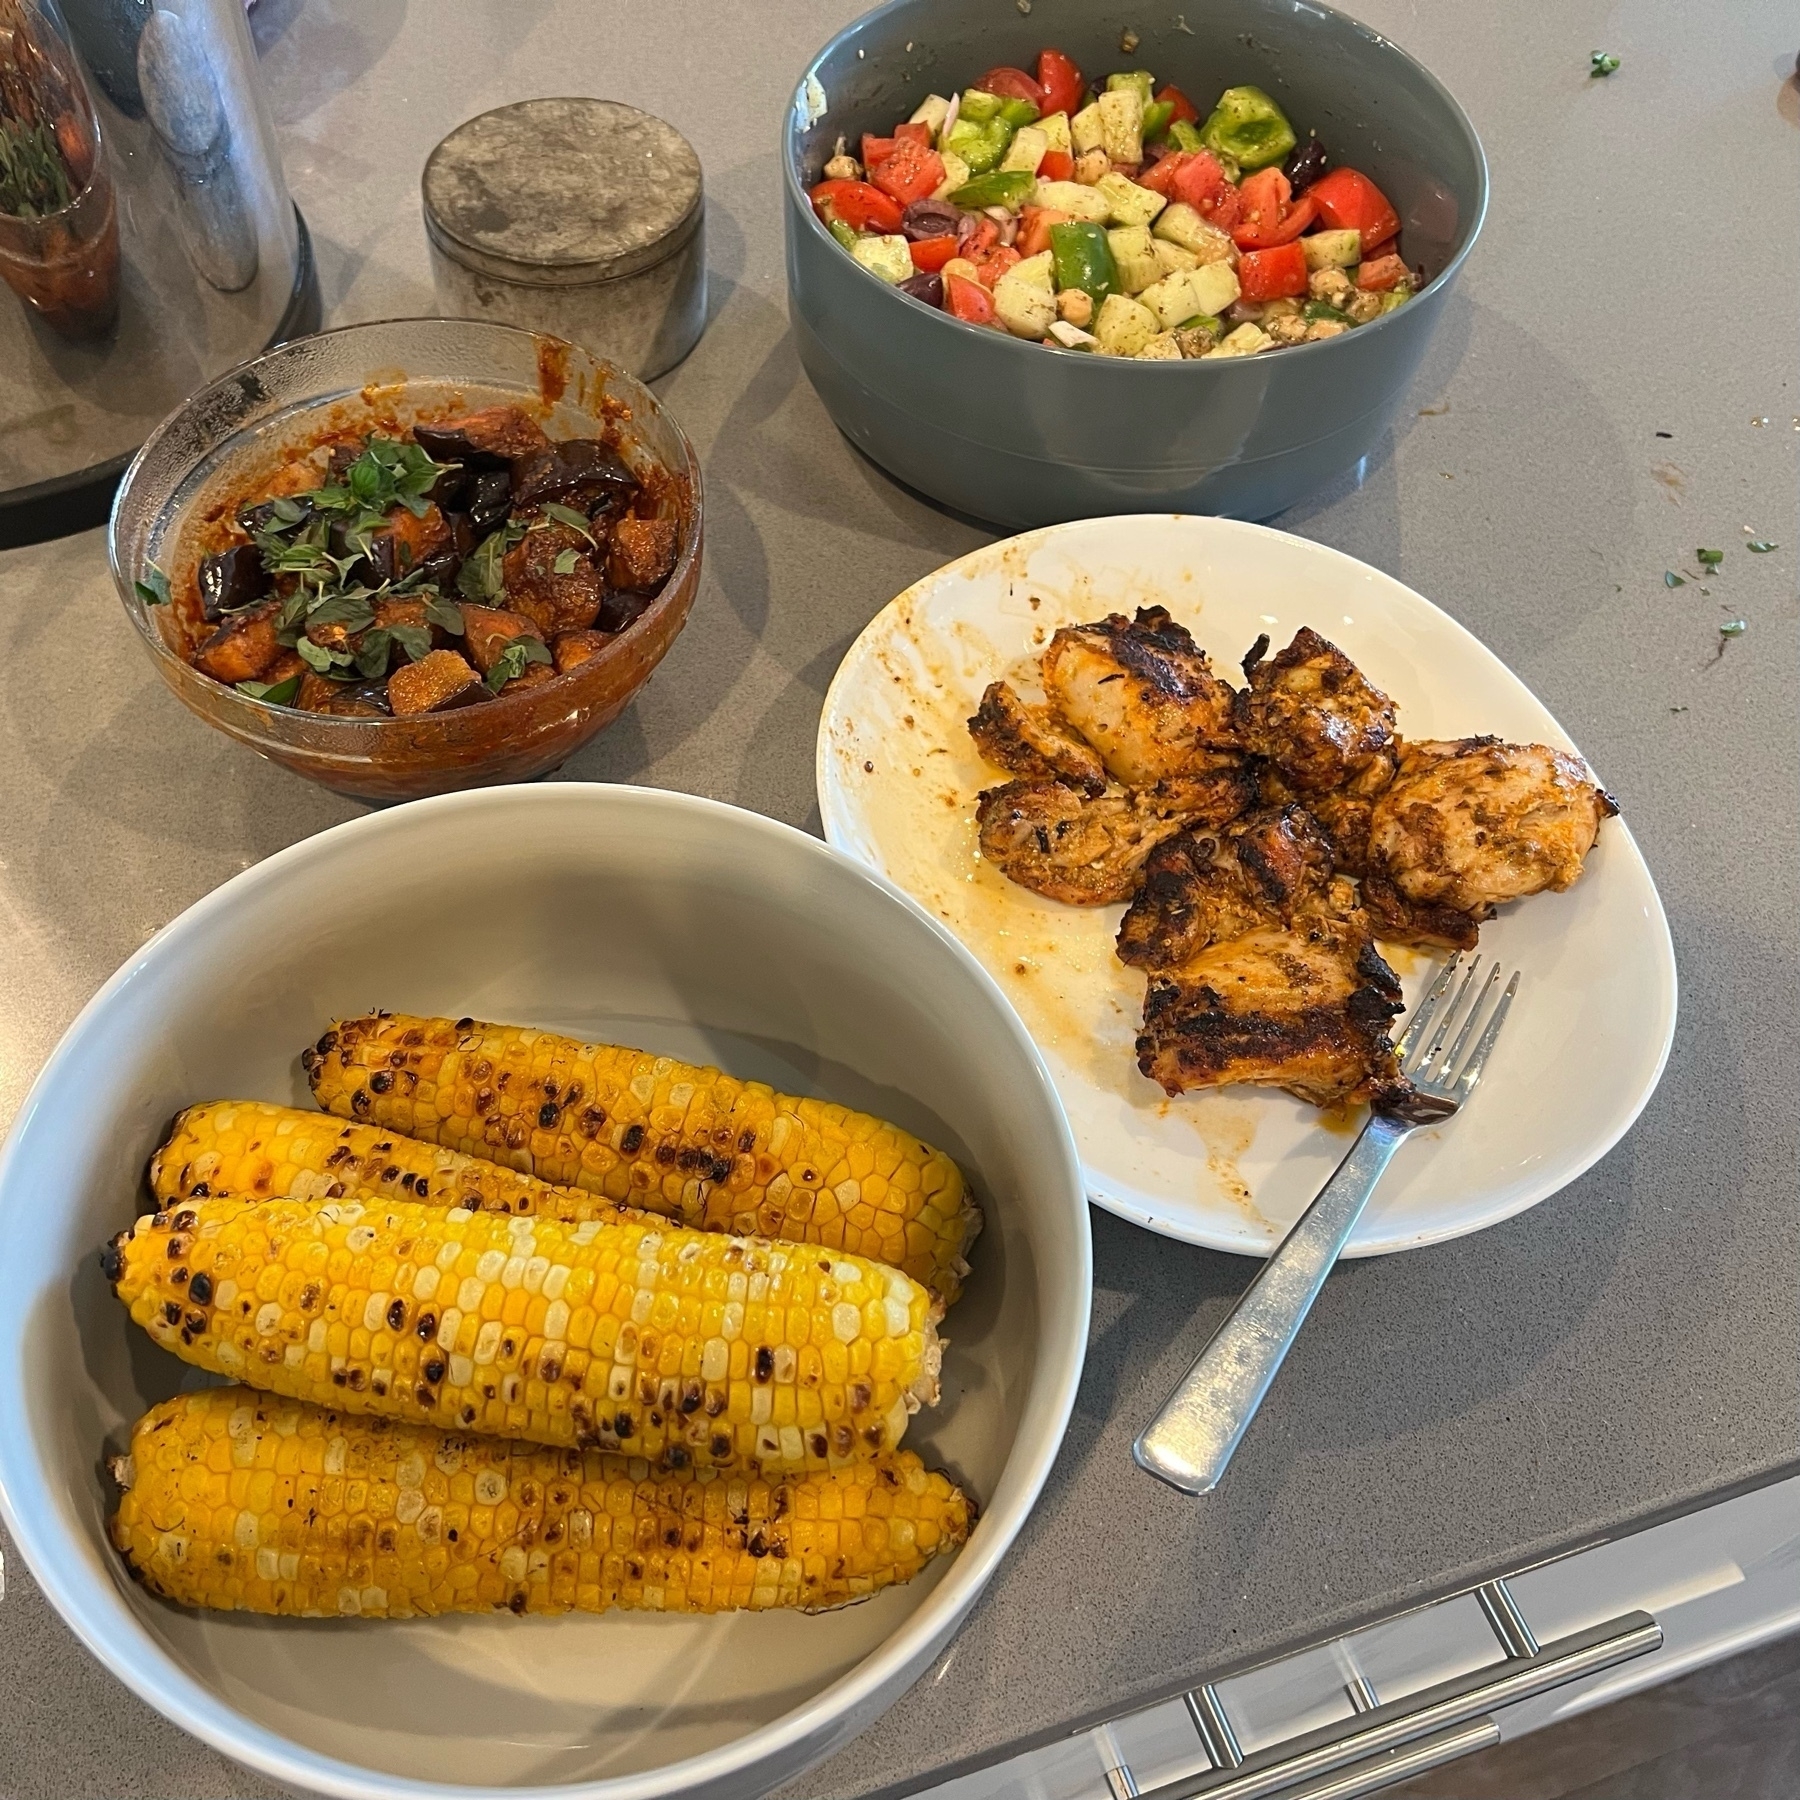 Greek salad, roasted eggplant in harissa, grilled chicken thighs, and grilled corn